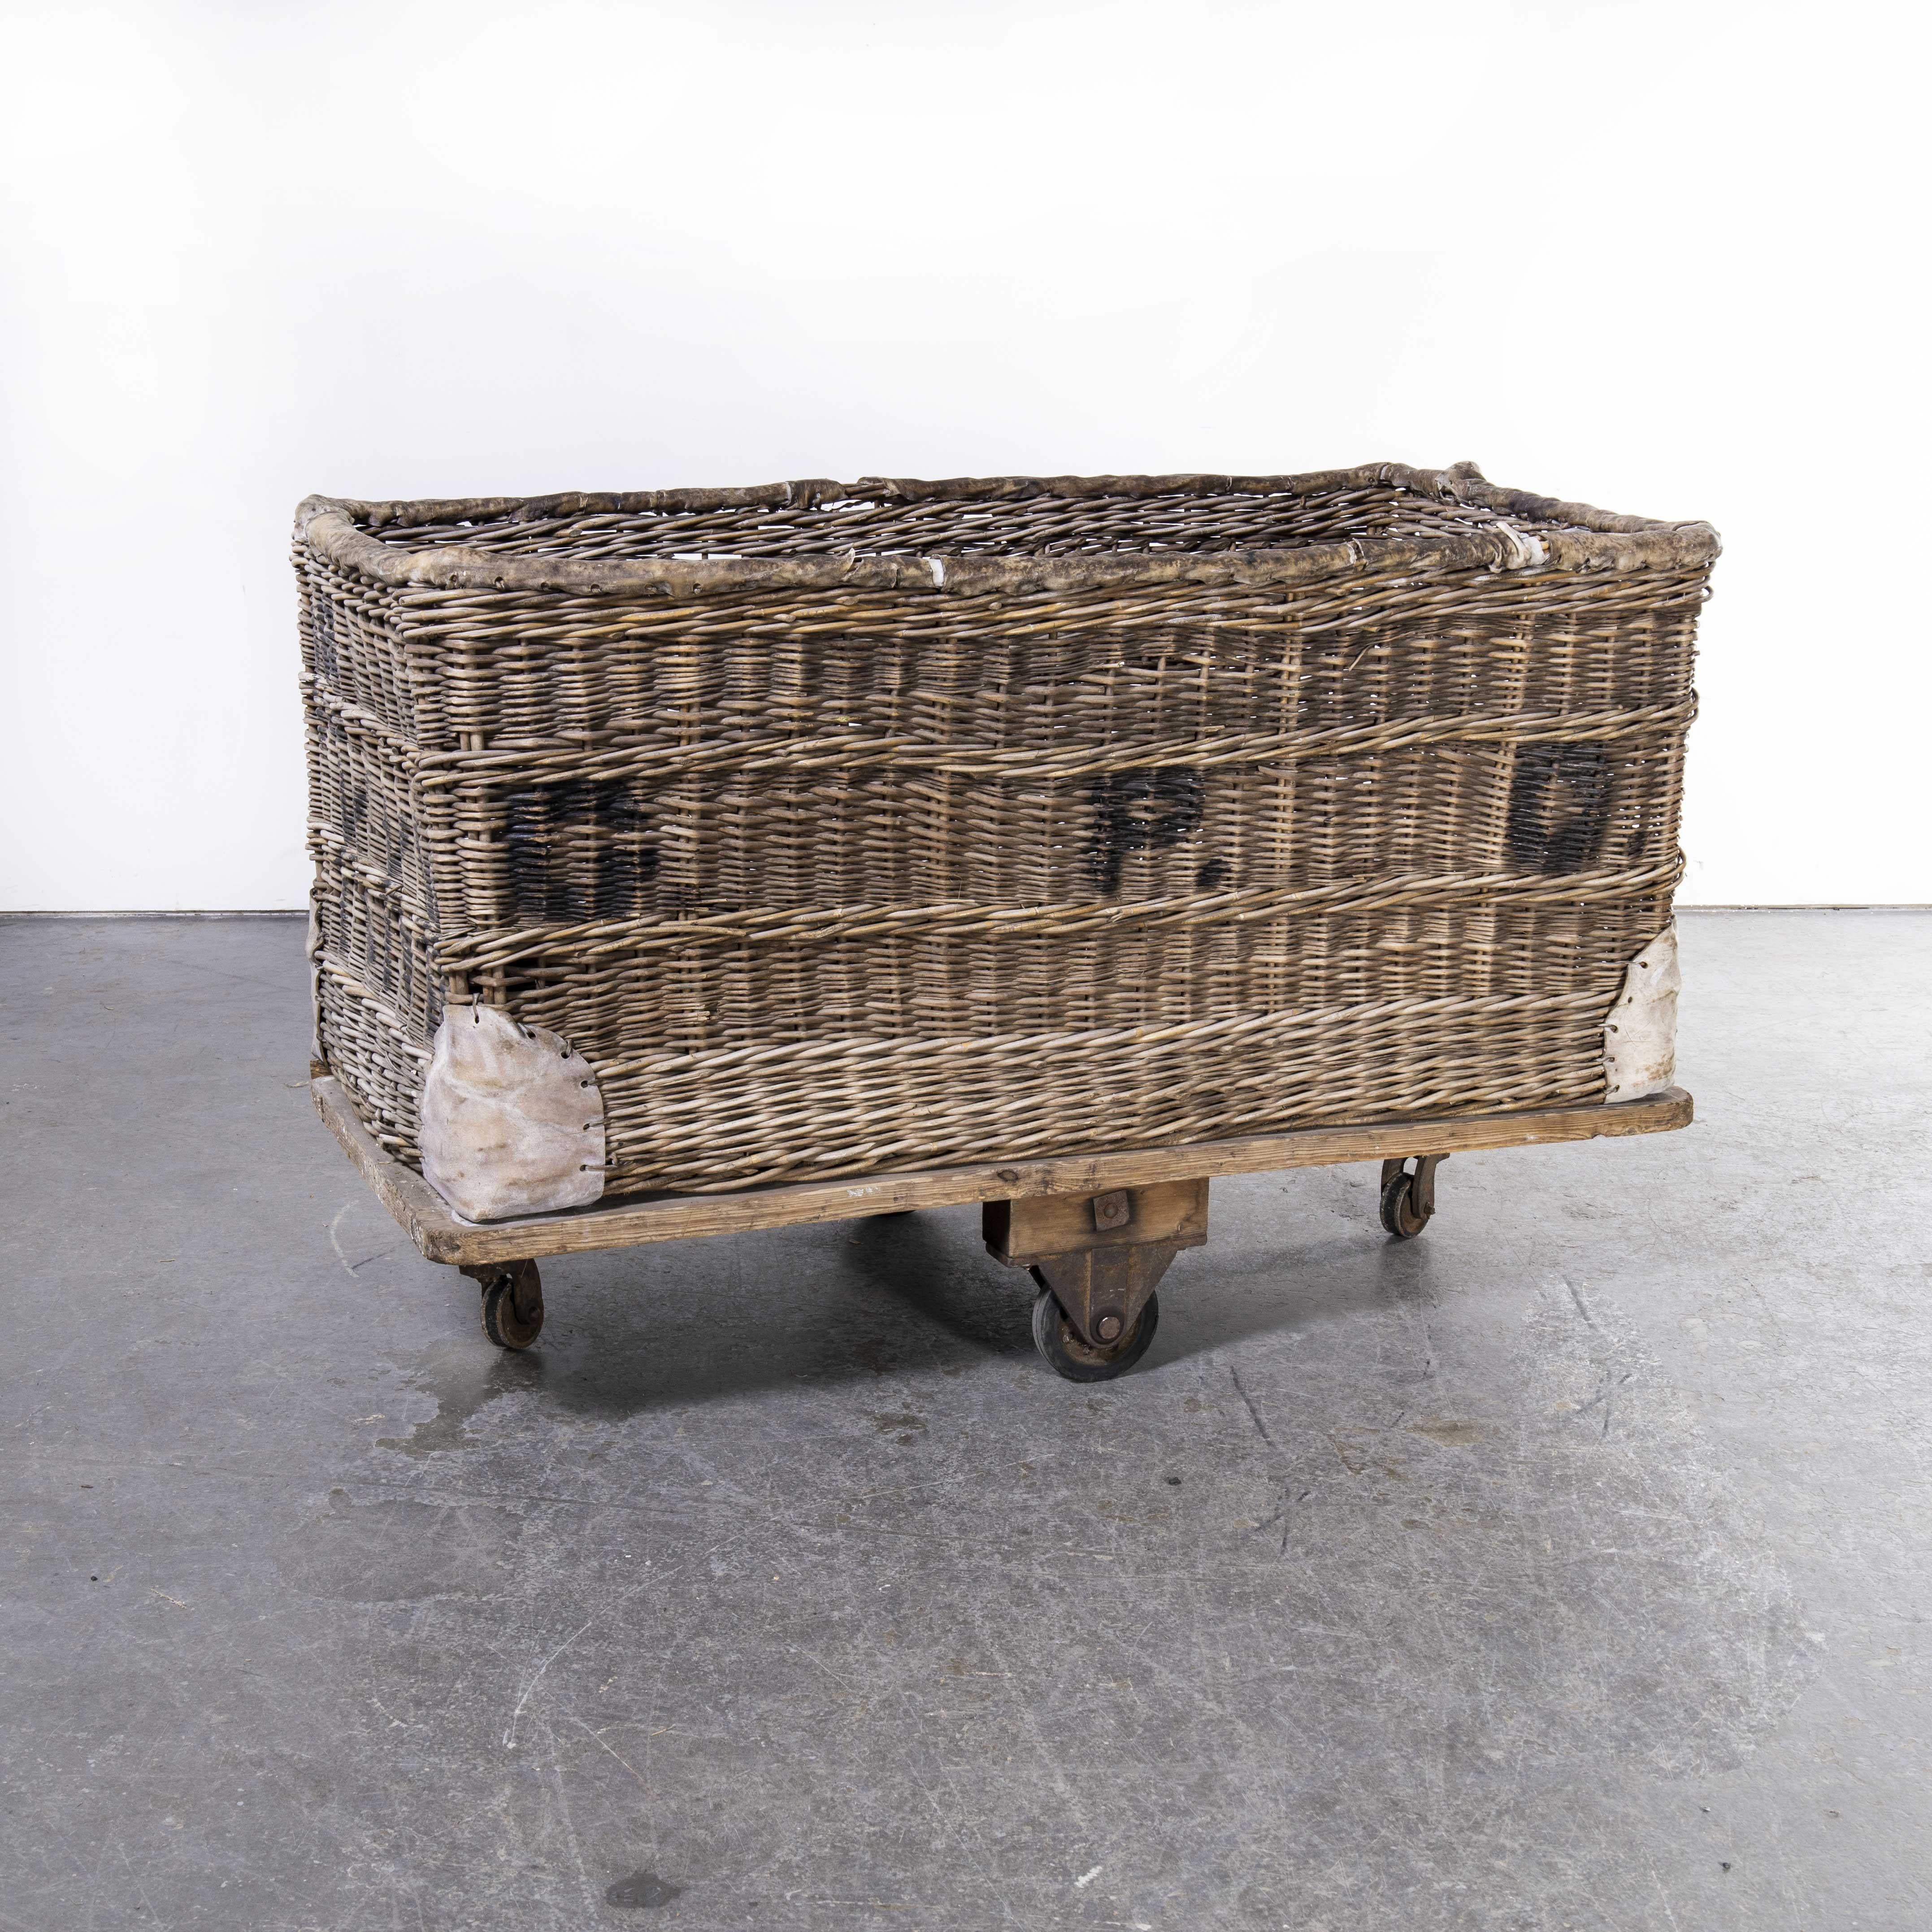 1960’s large rattan factory trolley – basket
1940’s large rattan factory trolley – basket. Stunning and very original survivor from the 1960’s. The basket is branded underneath ‘Workshops for the blind 1966 – Bristol’. The Bristol Asylum for the